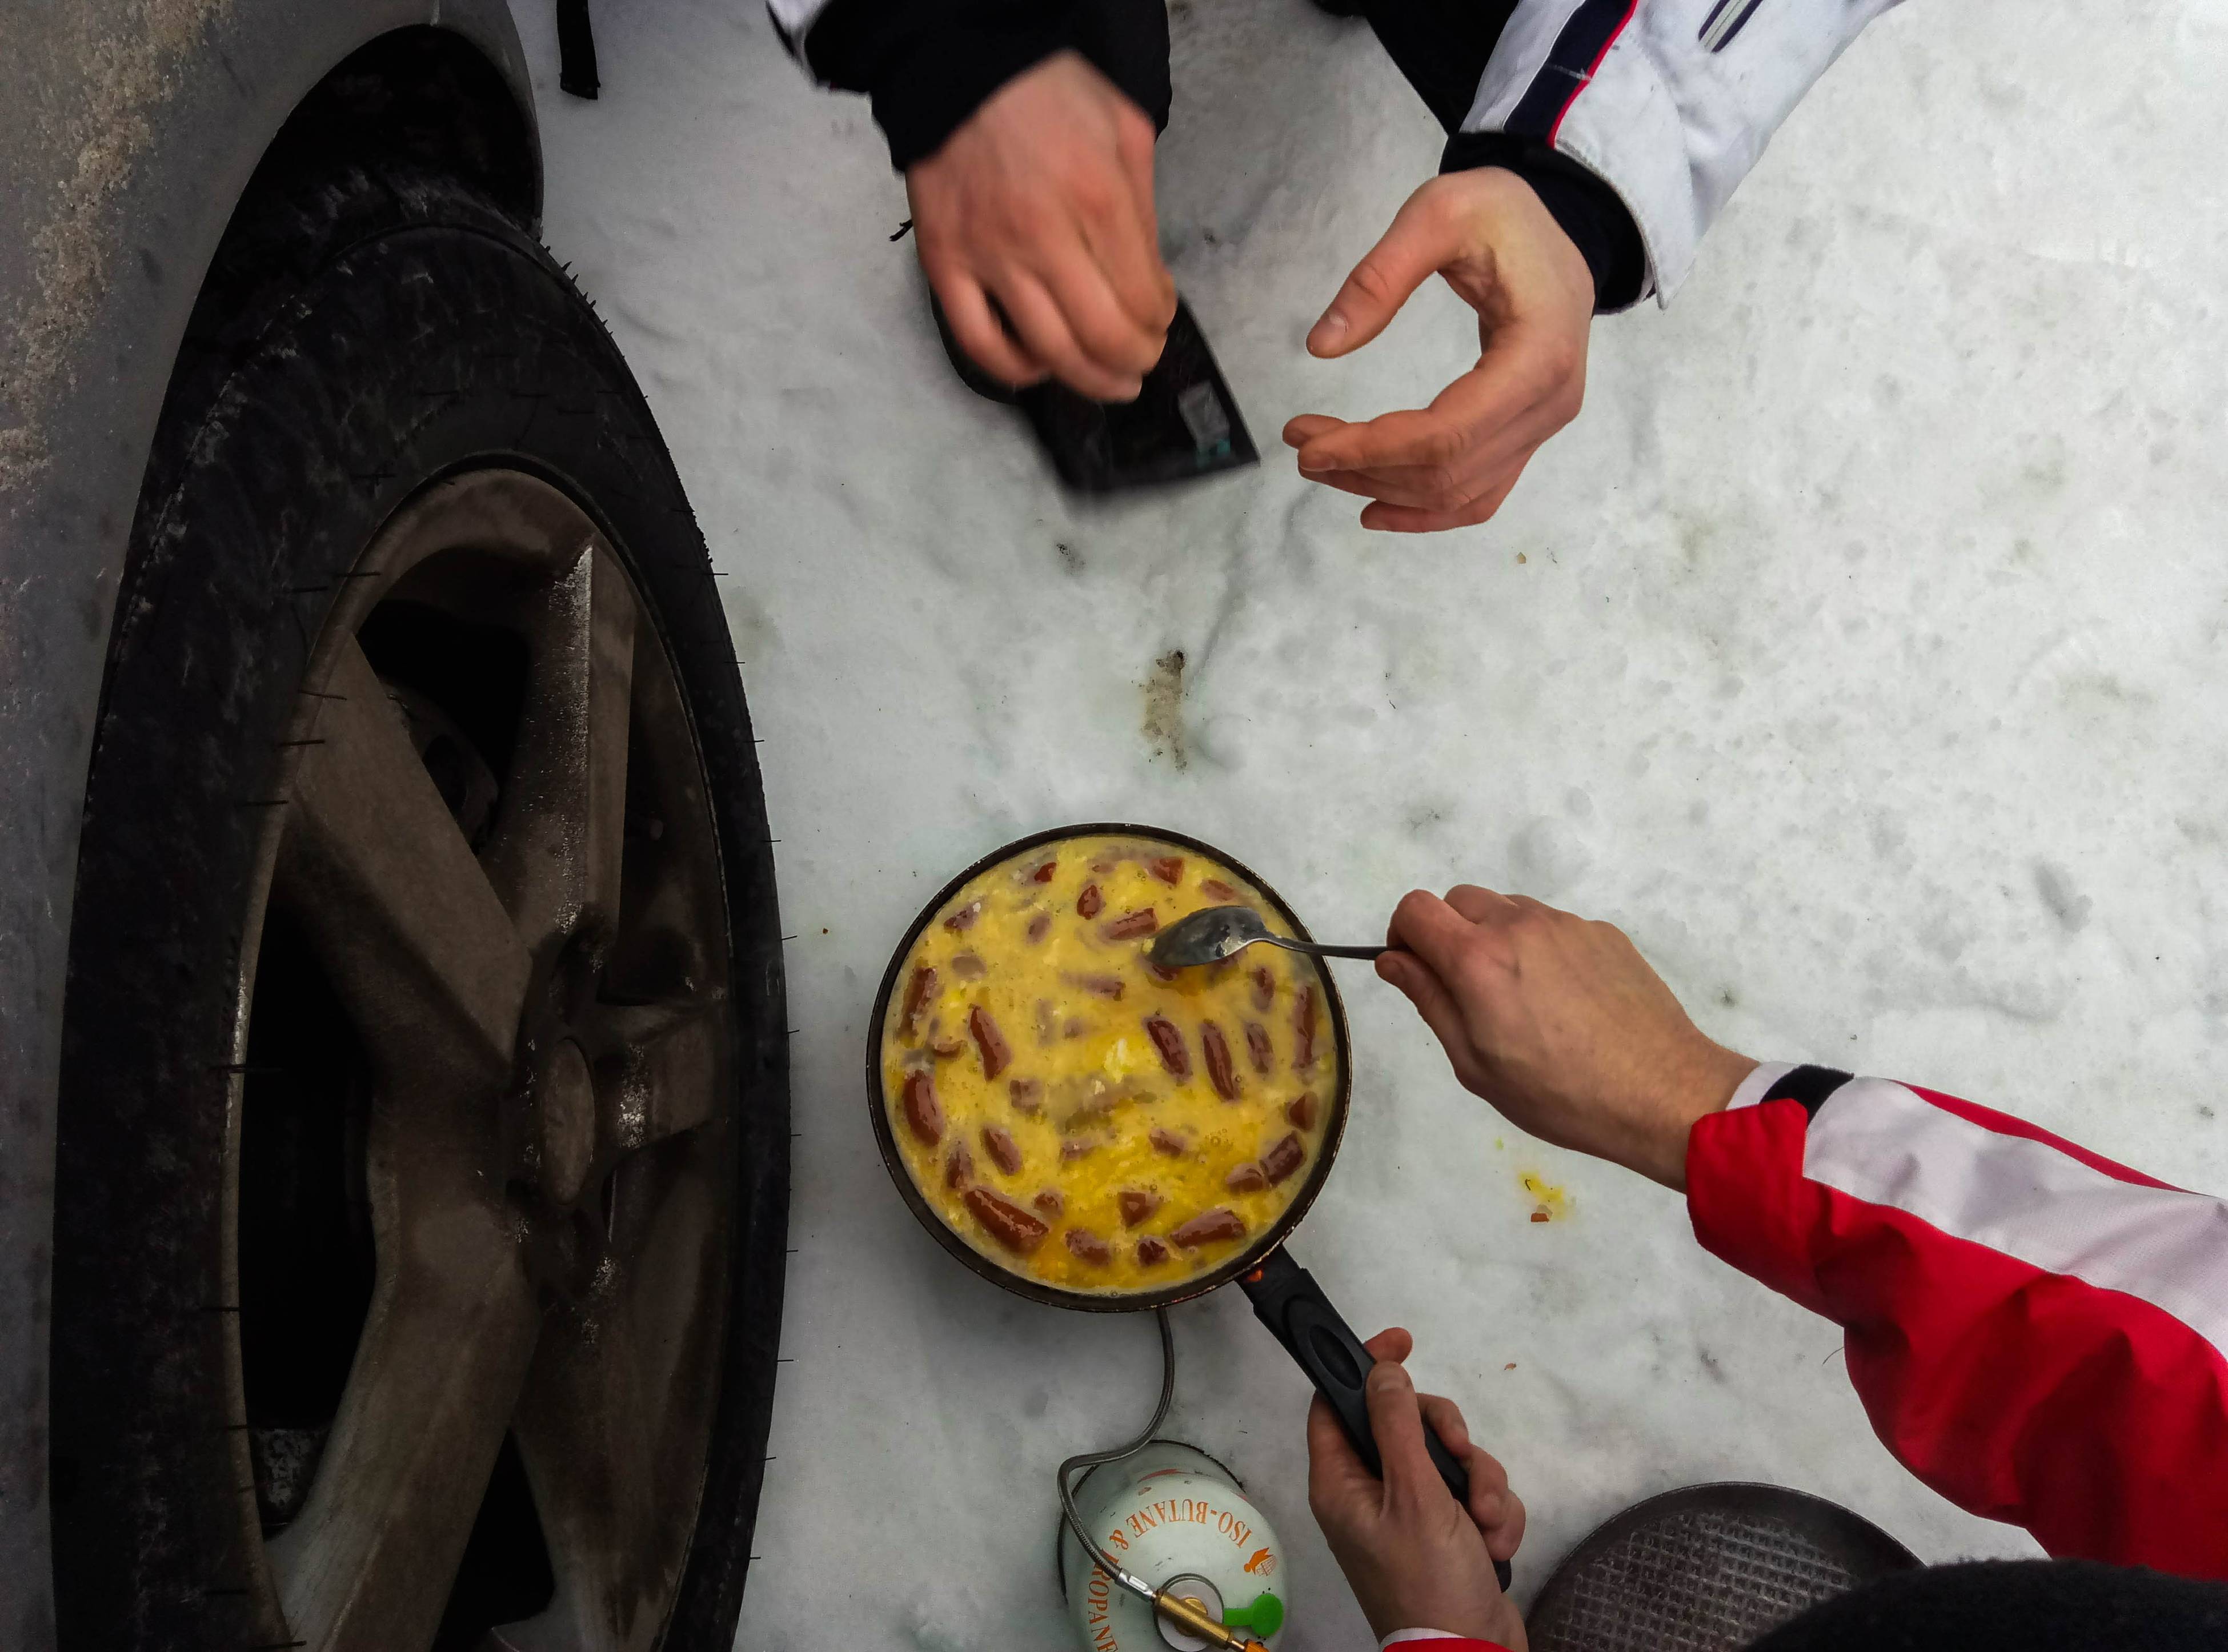 
My trip to the ski resort Bukovel. Part 4 - How we cooked eggs in a car parking lot